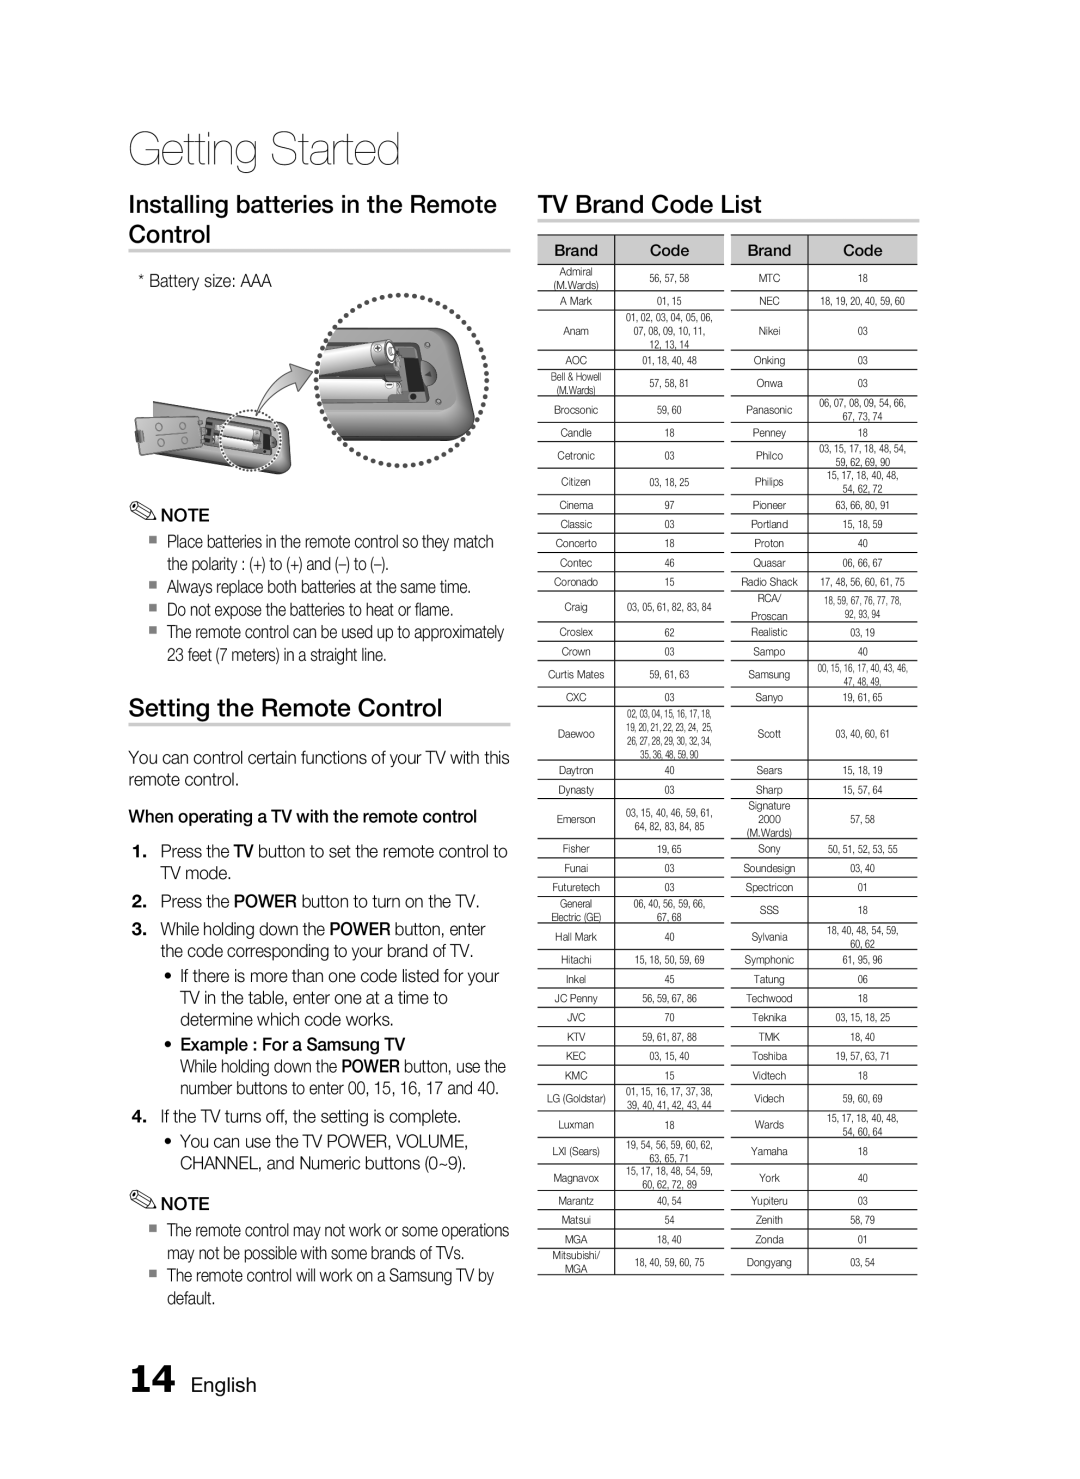 Samsung HT-D550 Installing batteries in the Remote Control, TV Brand Code List, Setting the Remote Control, English 